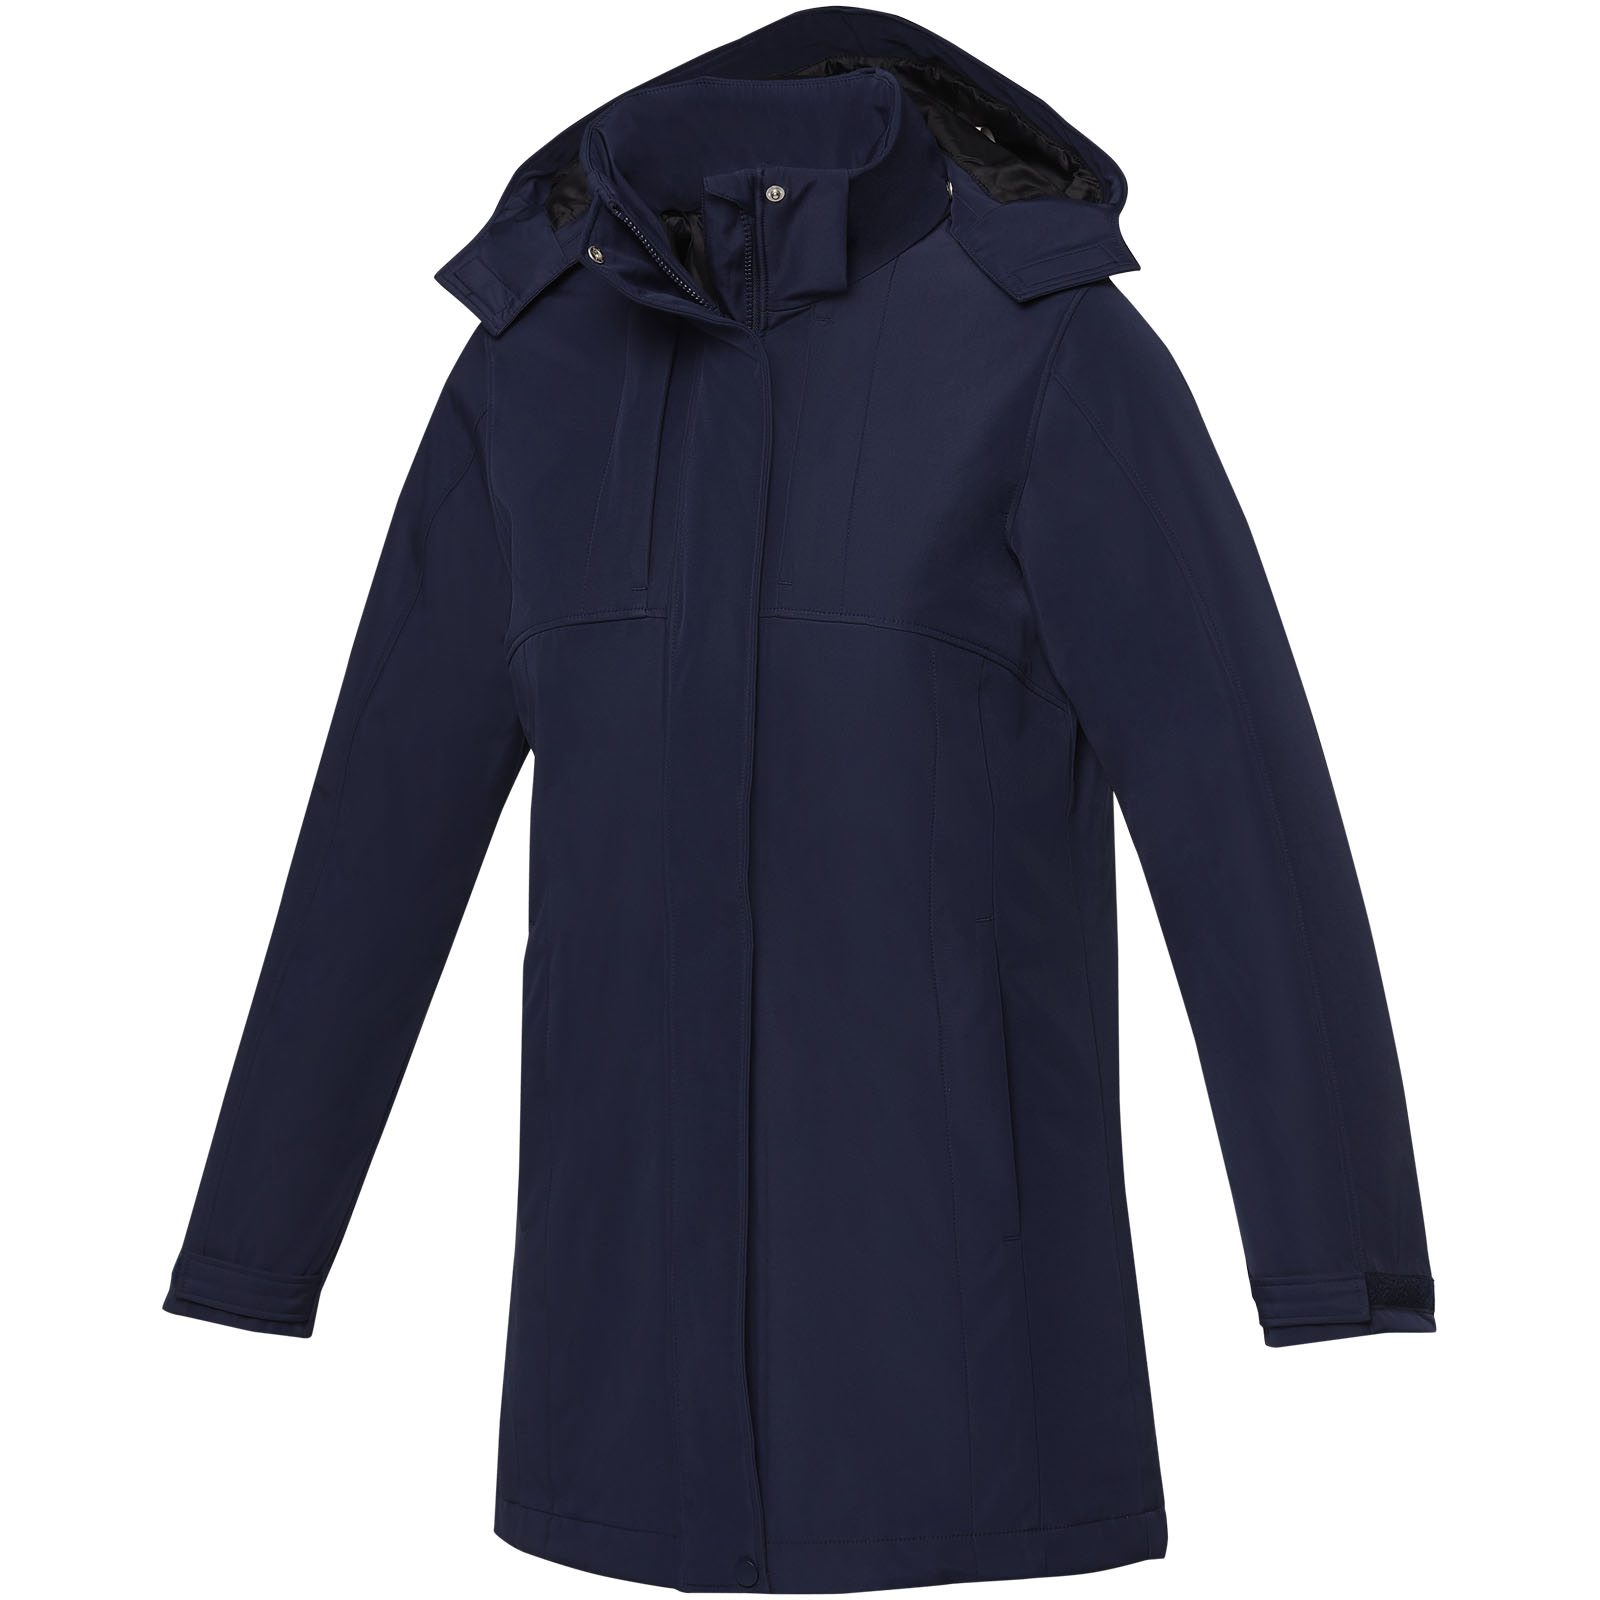 Clothing - Hardy women's insulated parka